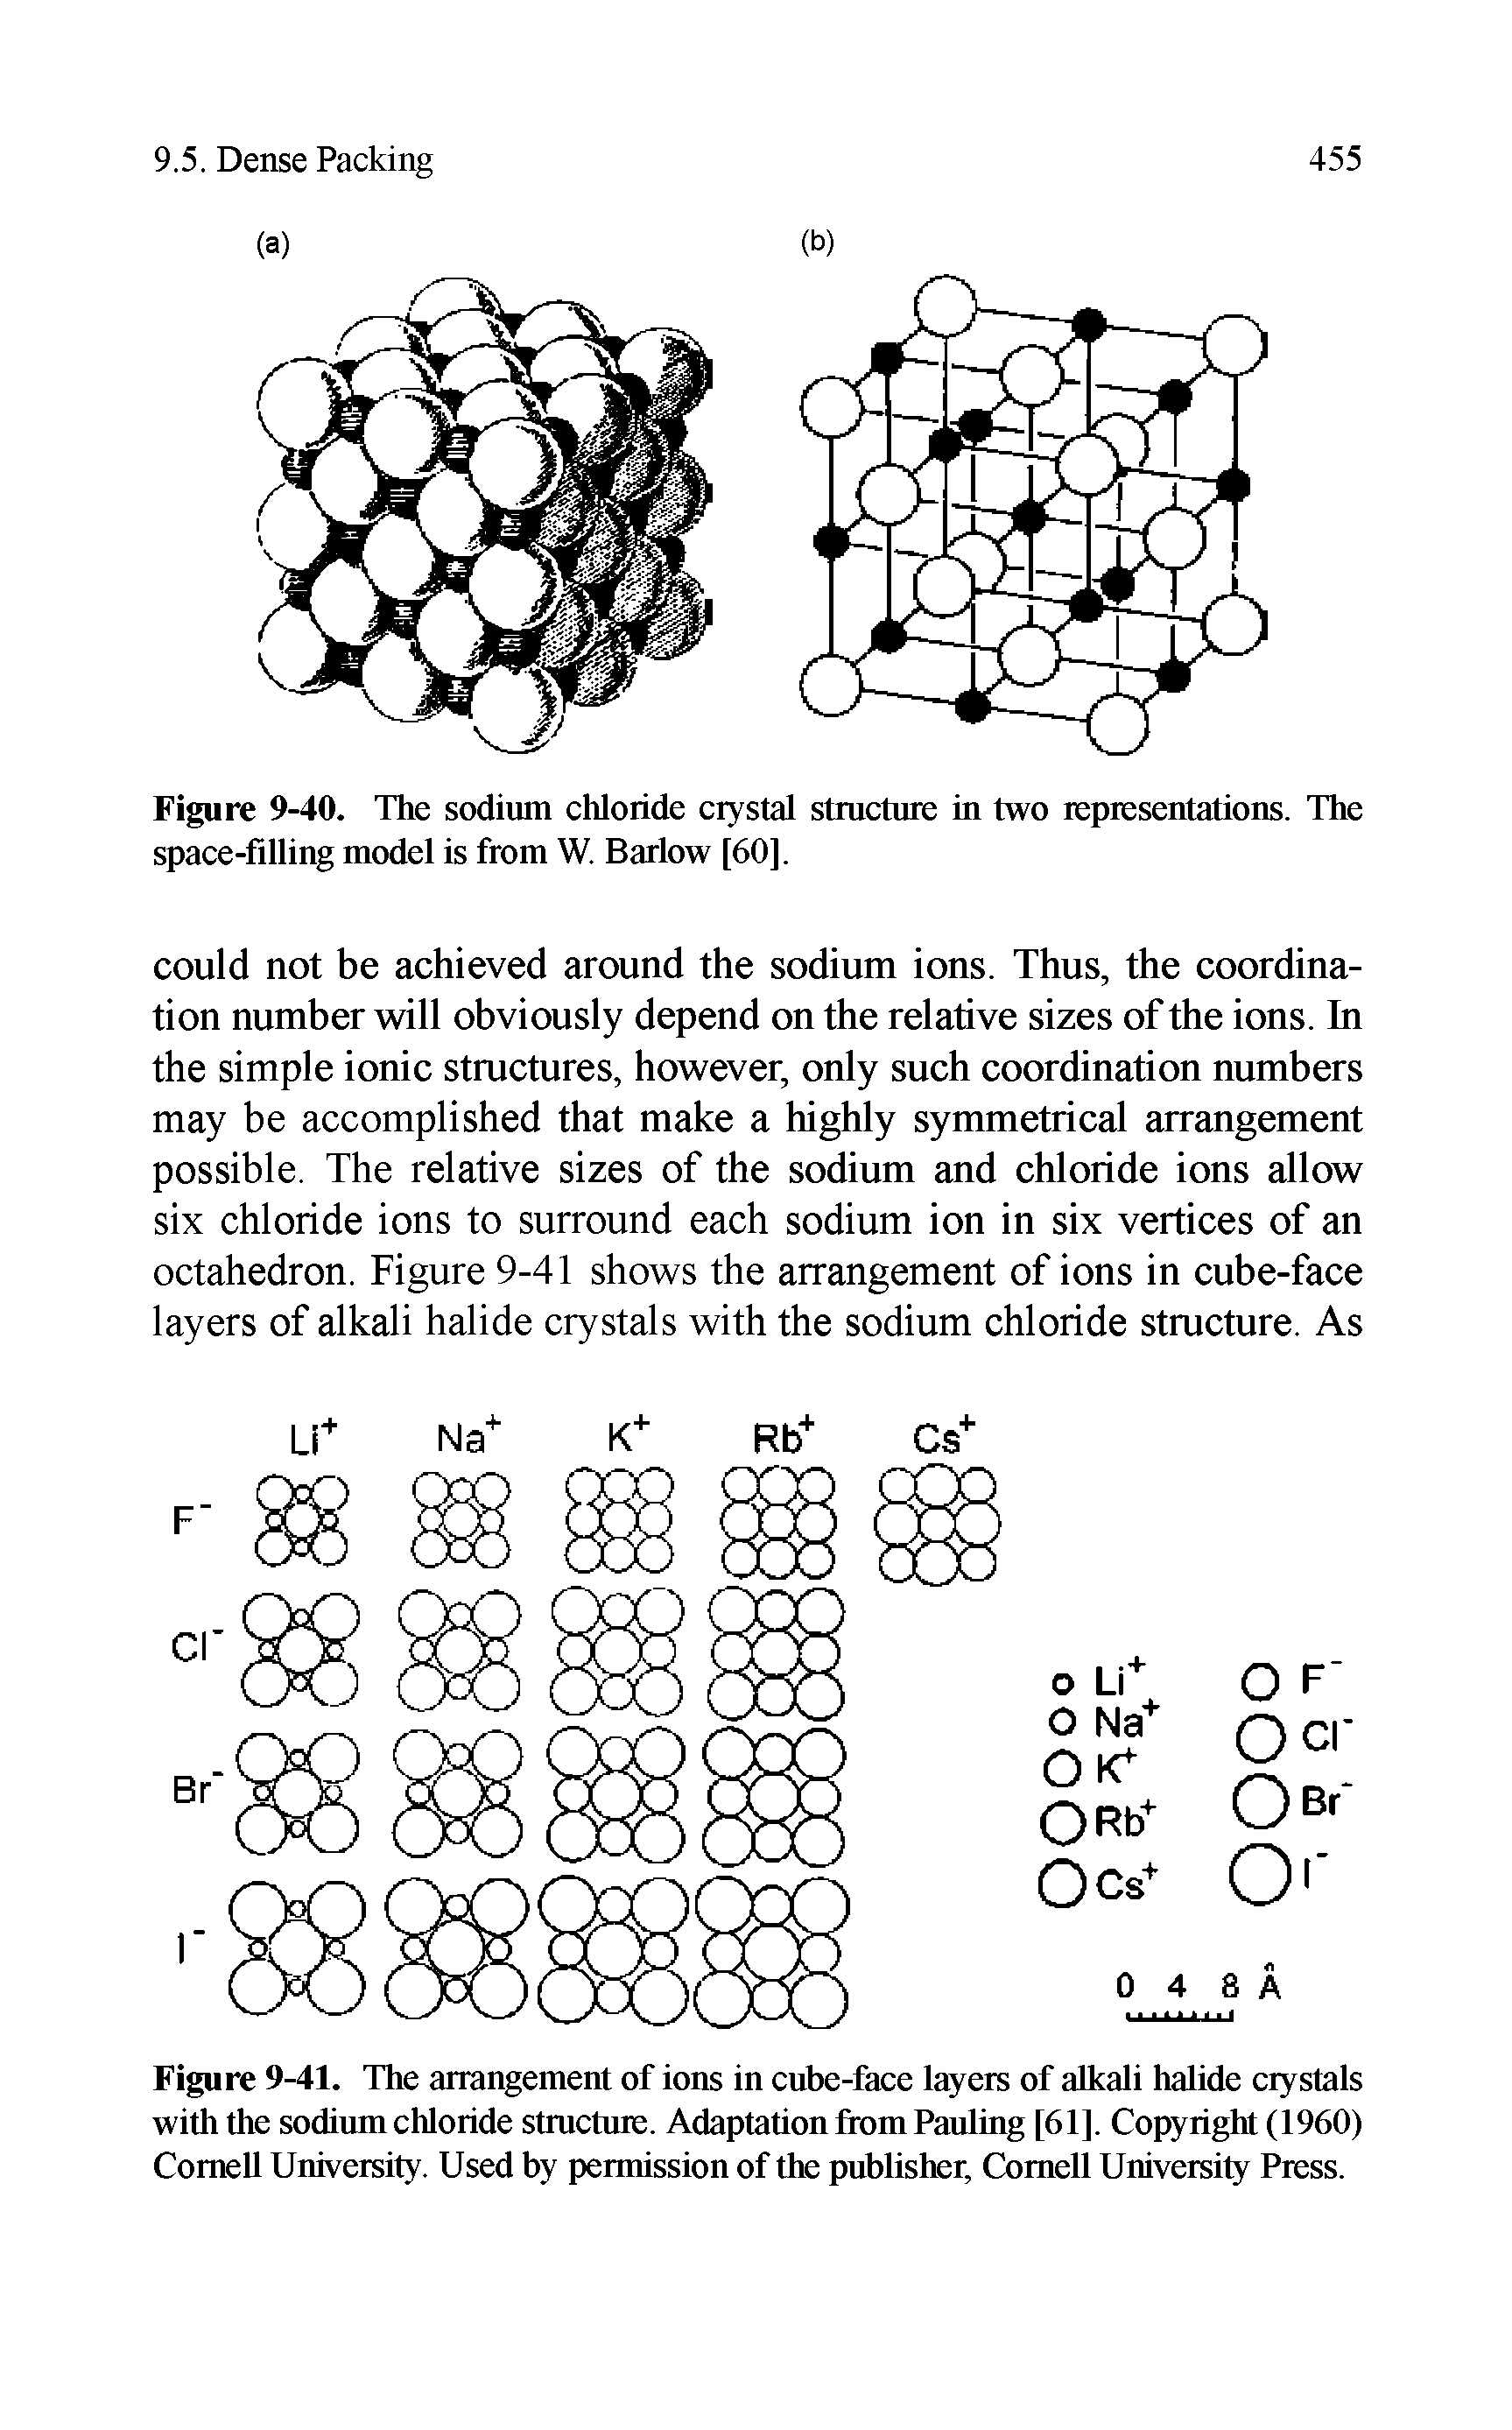 Figure 9-41. The arrangement of ions in cube-face layers of alkali halide crystals with the sodium chloride structure. Adaptation from Pauling [61], Copyright (1960) Cornell University. Used by permission of the publisher, Cornell University Press.